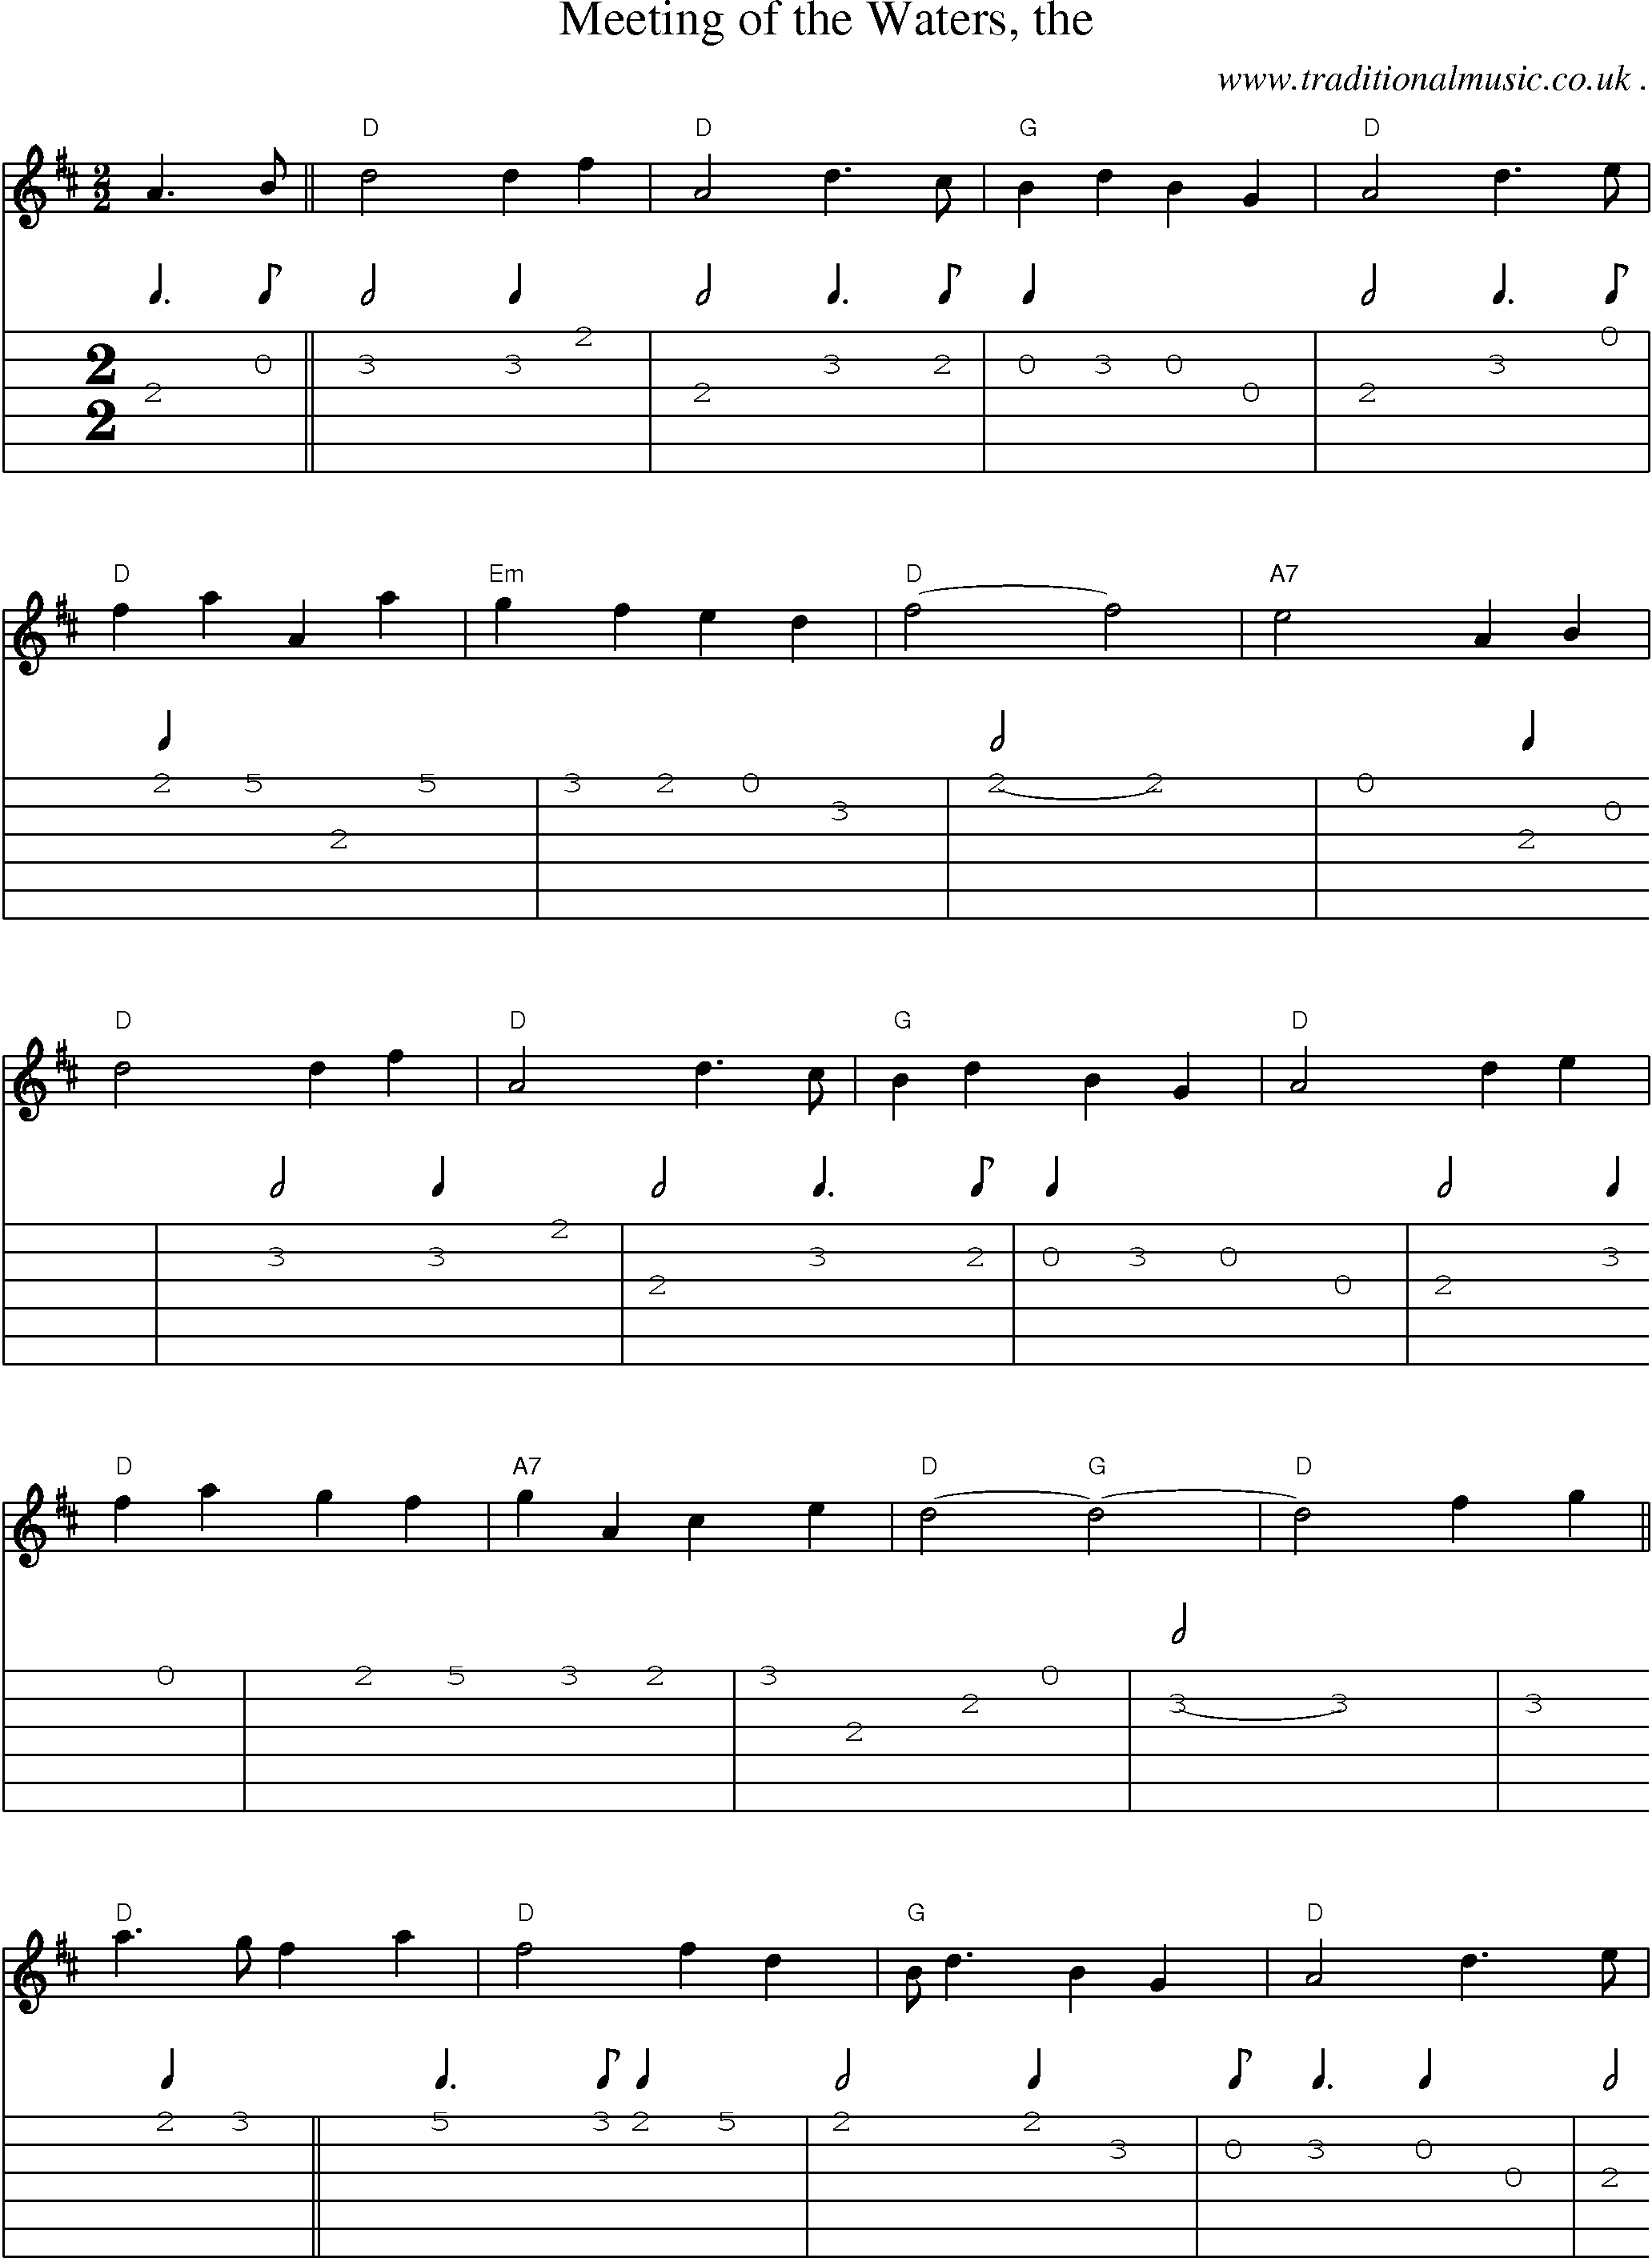 Sheet-music  score, Chords and Guitar Tabs for Meeting Of The Waters The